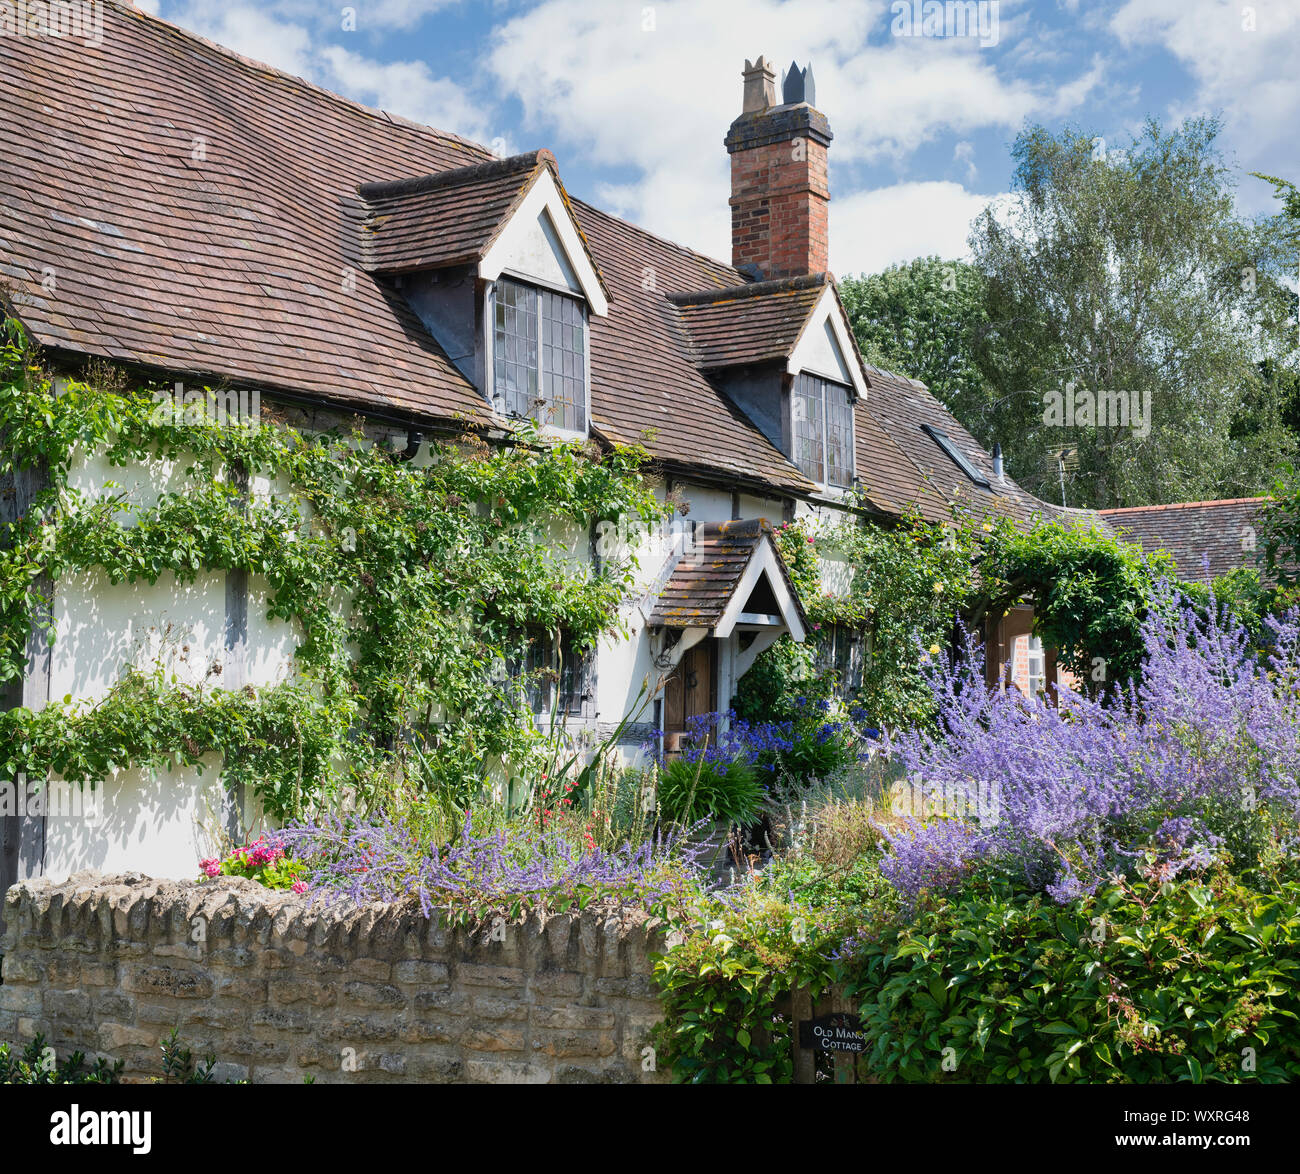 Timber framed cottage and front garden. Little Comberton, Cotswolds, Wychavon district, Worcestershire, UK Stock Photo